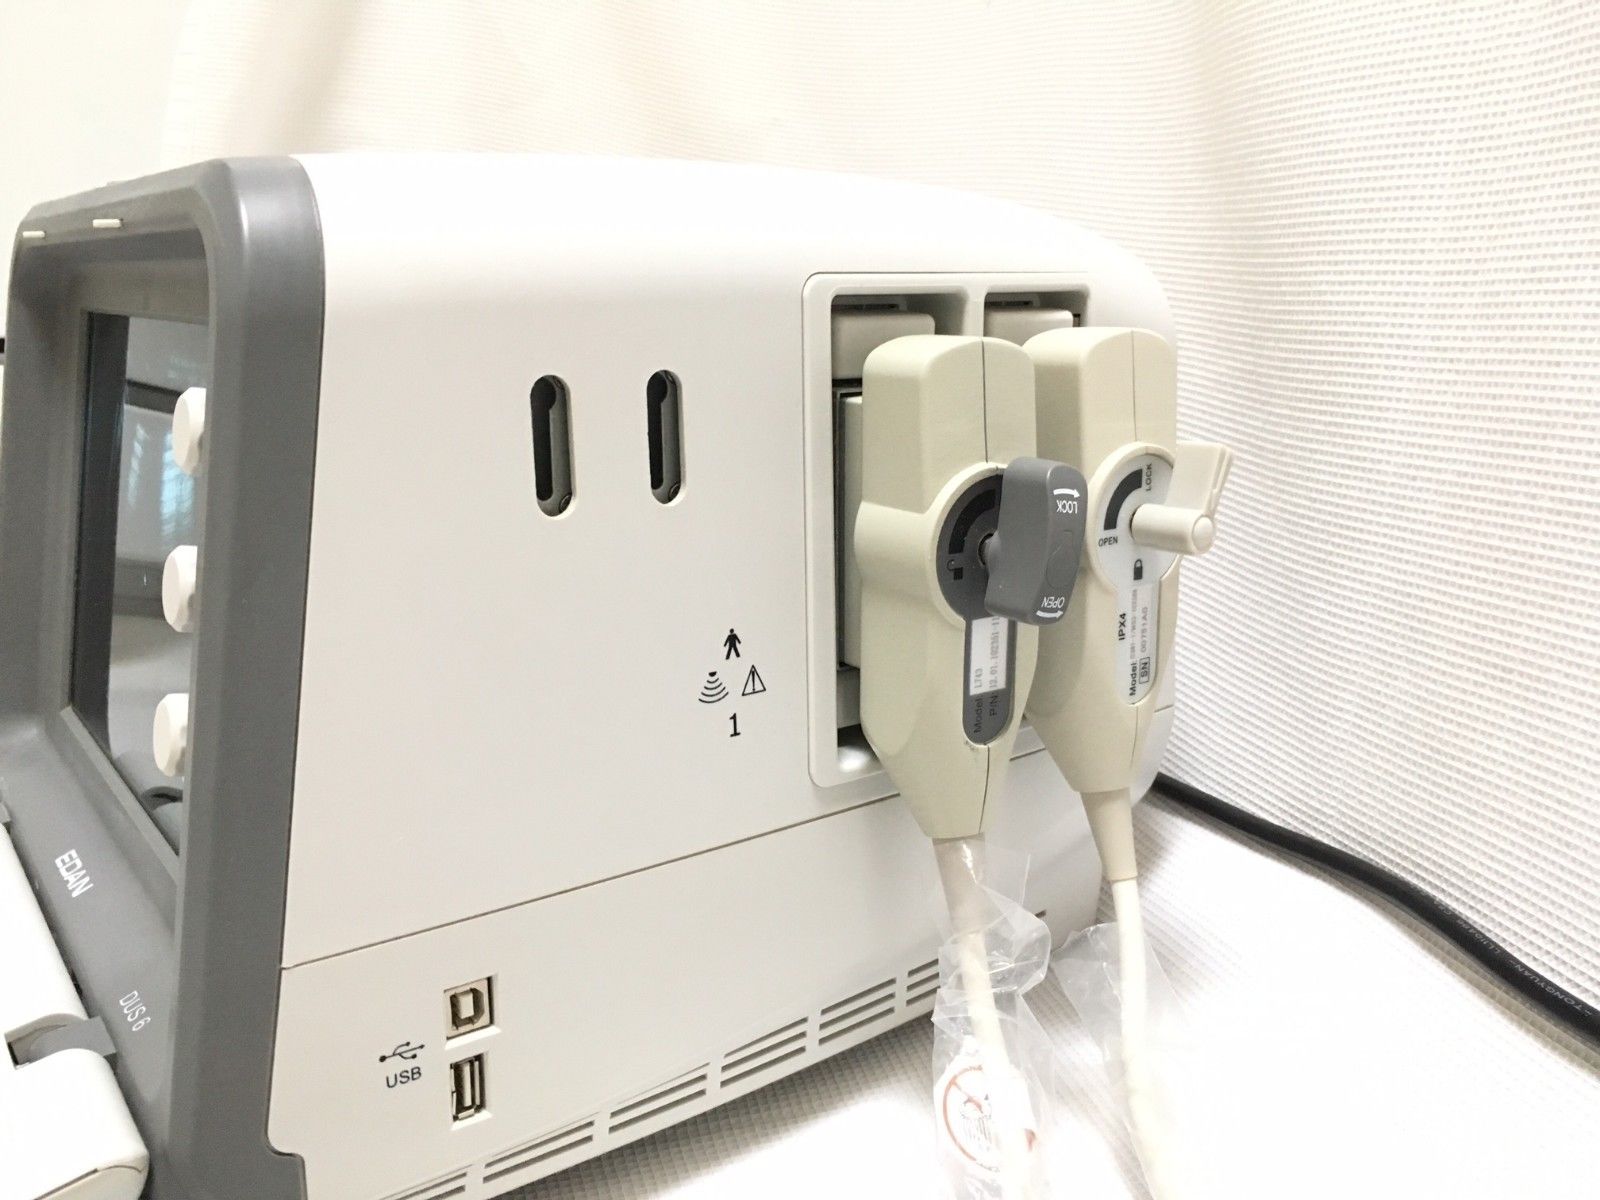 EDAN ULTRASOUND DUS-6 Ultrasonic Imaging System w/ 2 PROBES, Many EXTRAS, NICE! DIAGNOSTIC ULTRASOUND MACHINES FOR SALE